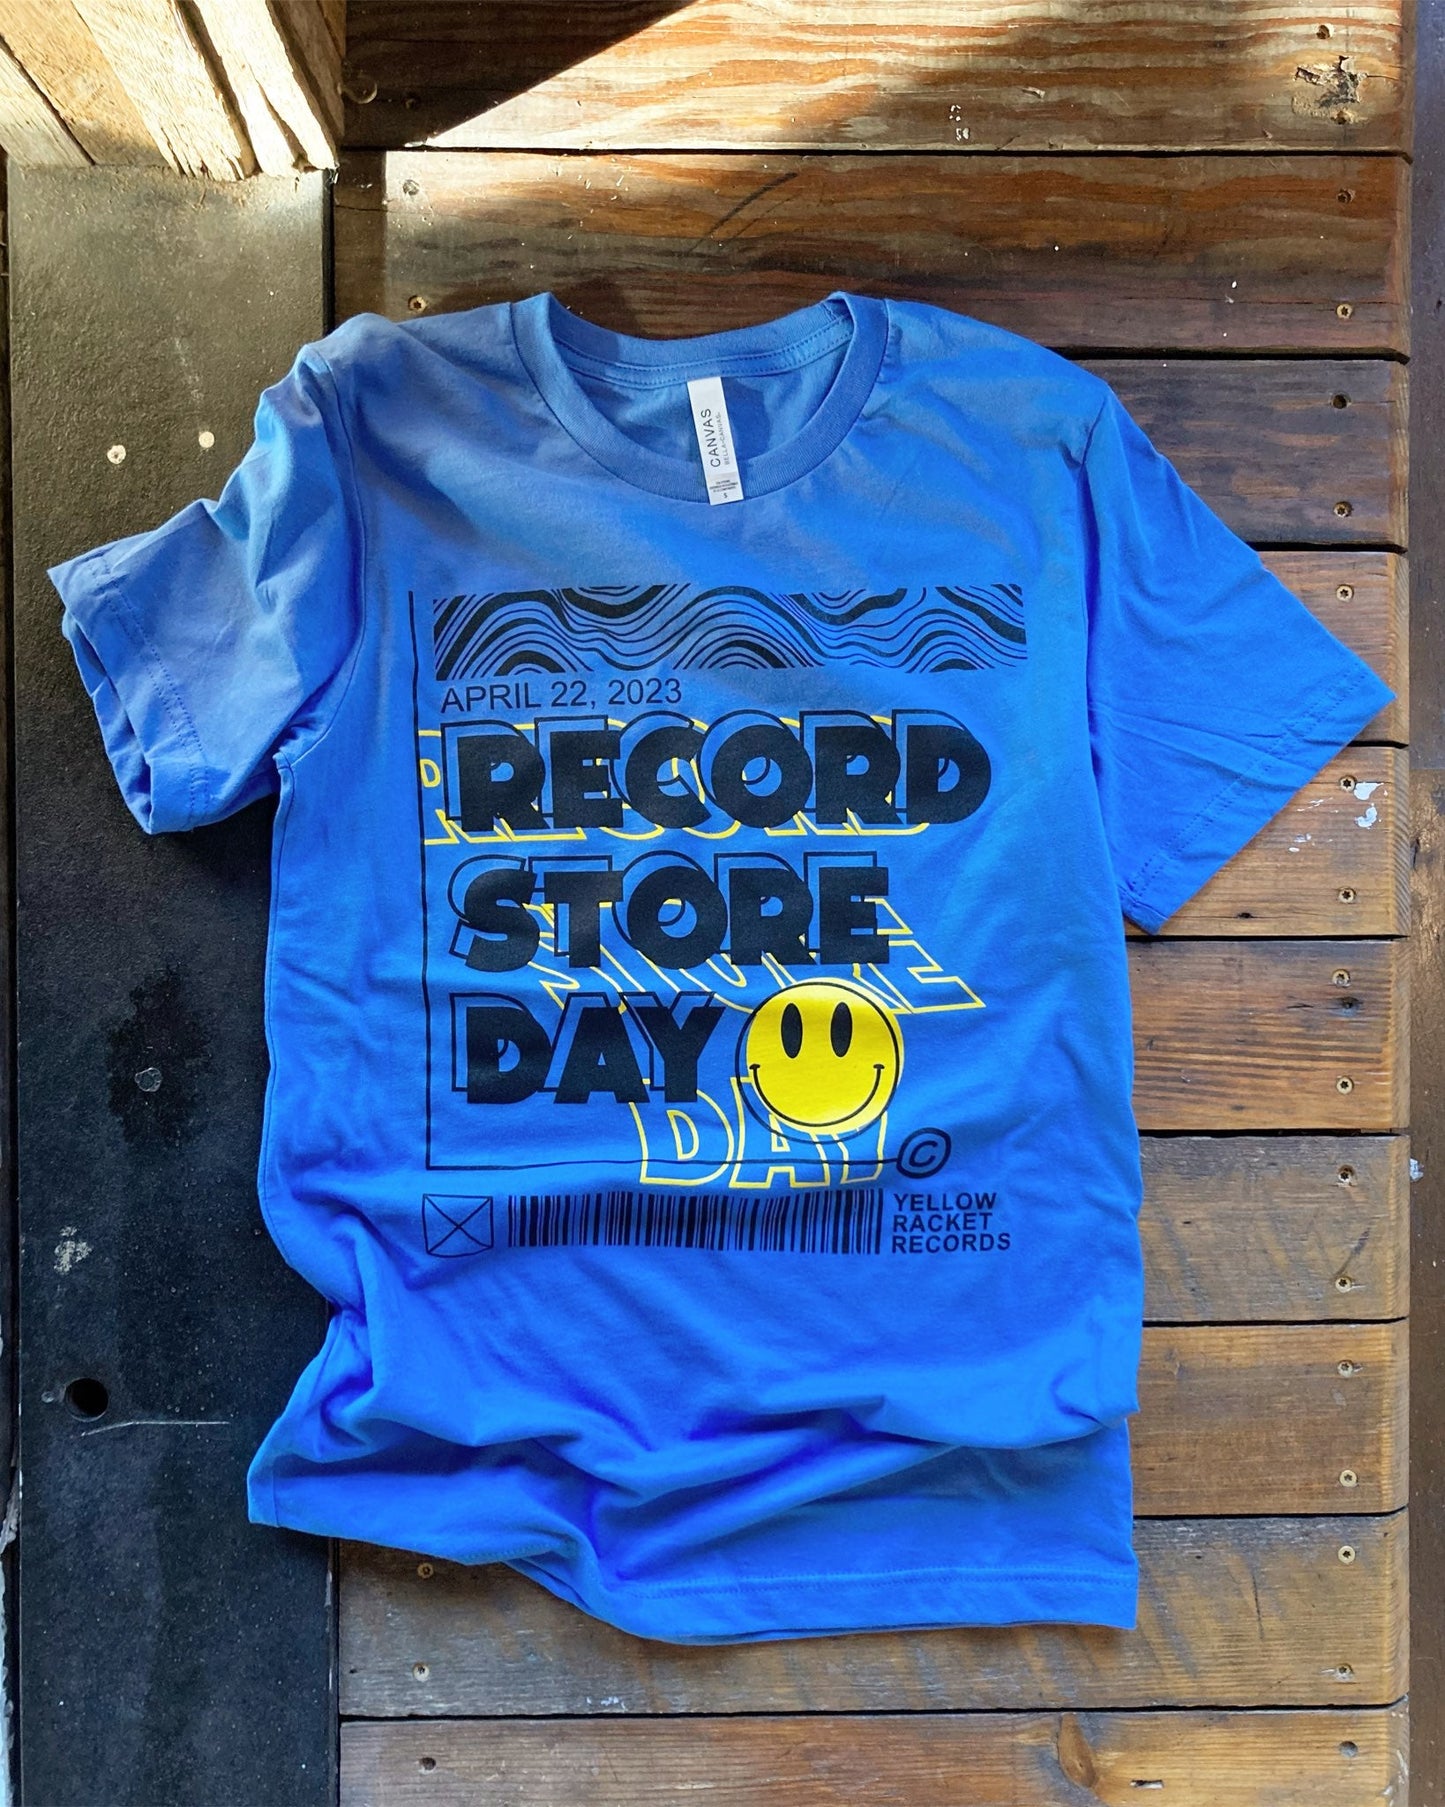 Smiley Face T-Shirt (Blue/Black/Yellow) - Record Store Day 2023 - Smiley Face T-Shirt (Blue/Black/Yellow) - Record Store Day 2023 - L - Apparel - Yellow Racket Records